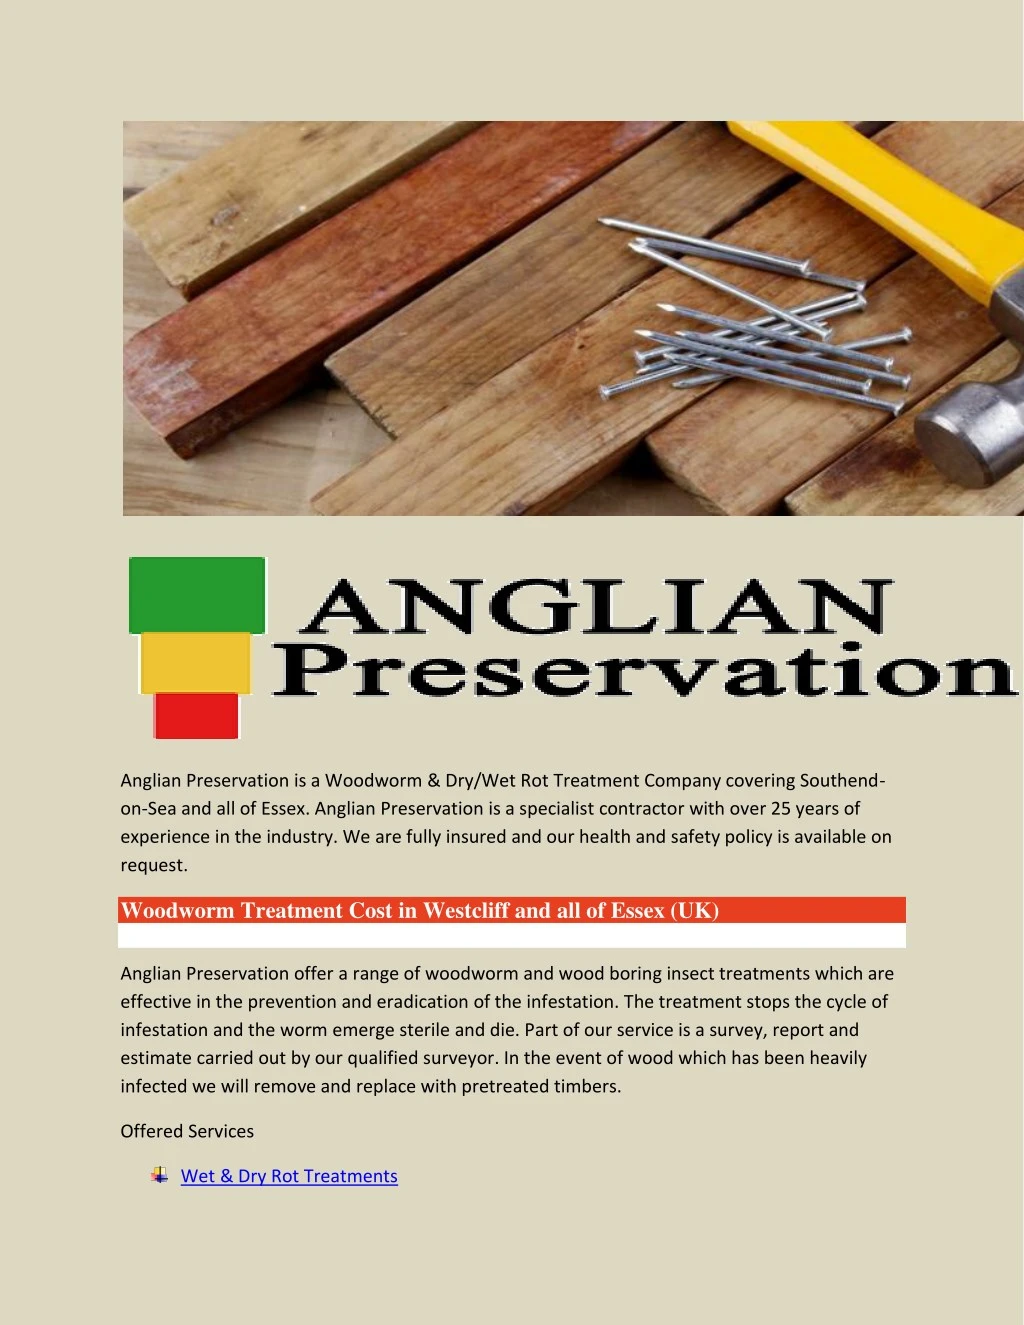 anglian preservation is a woodworm